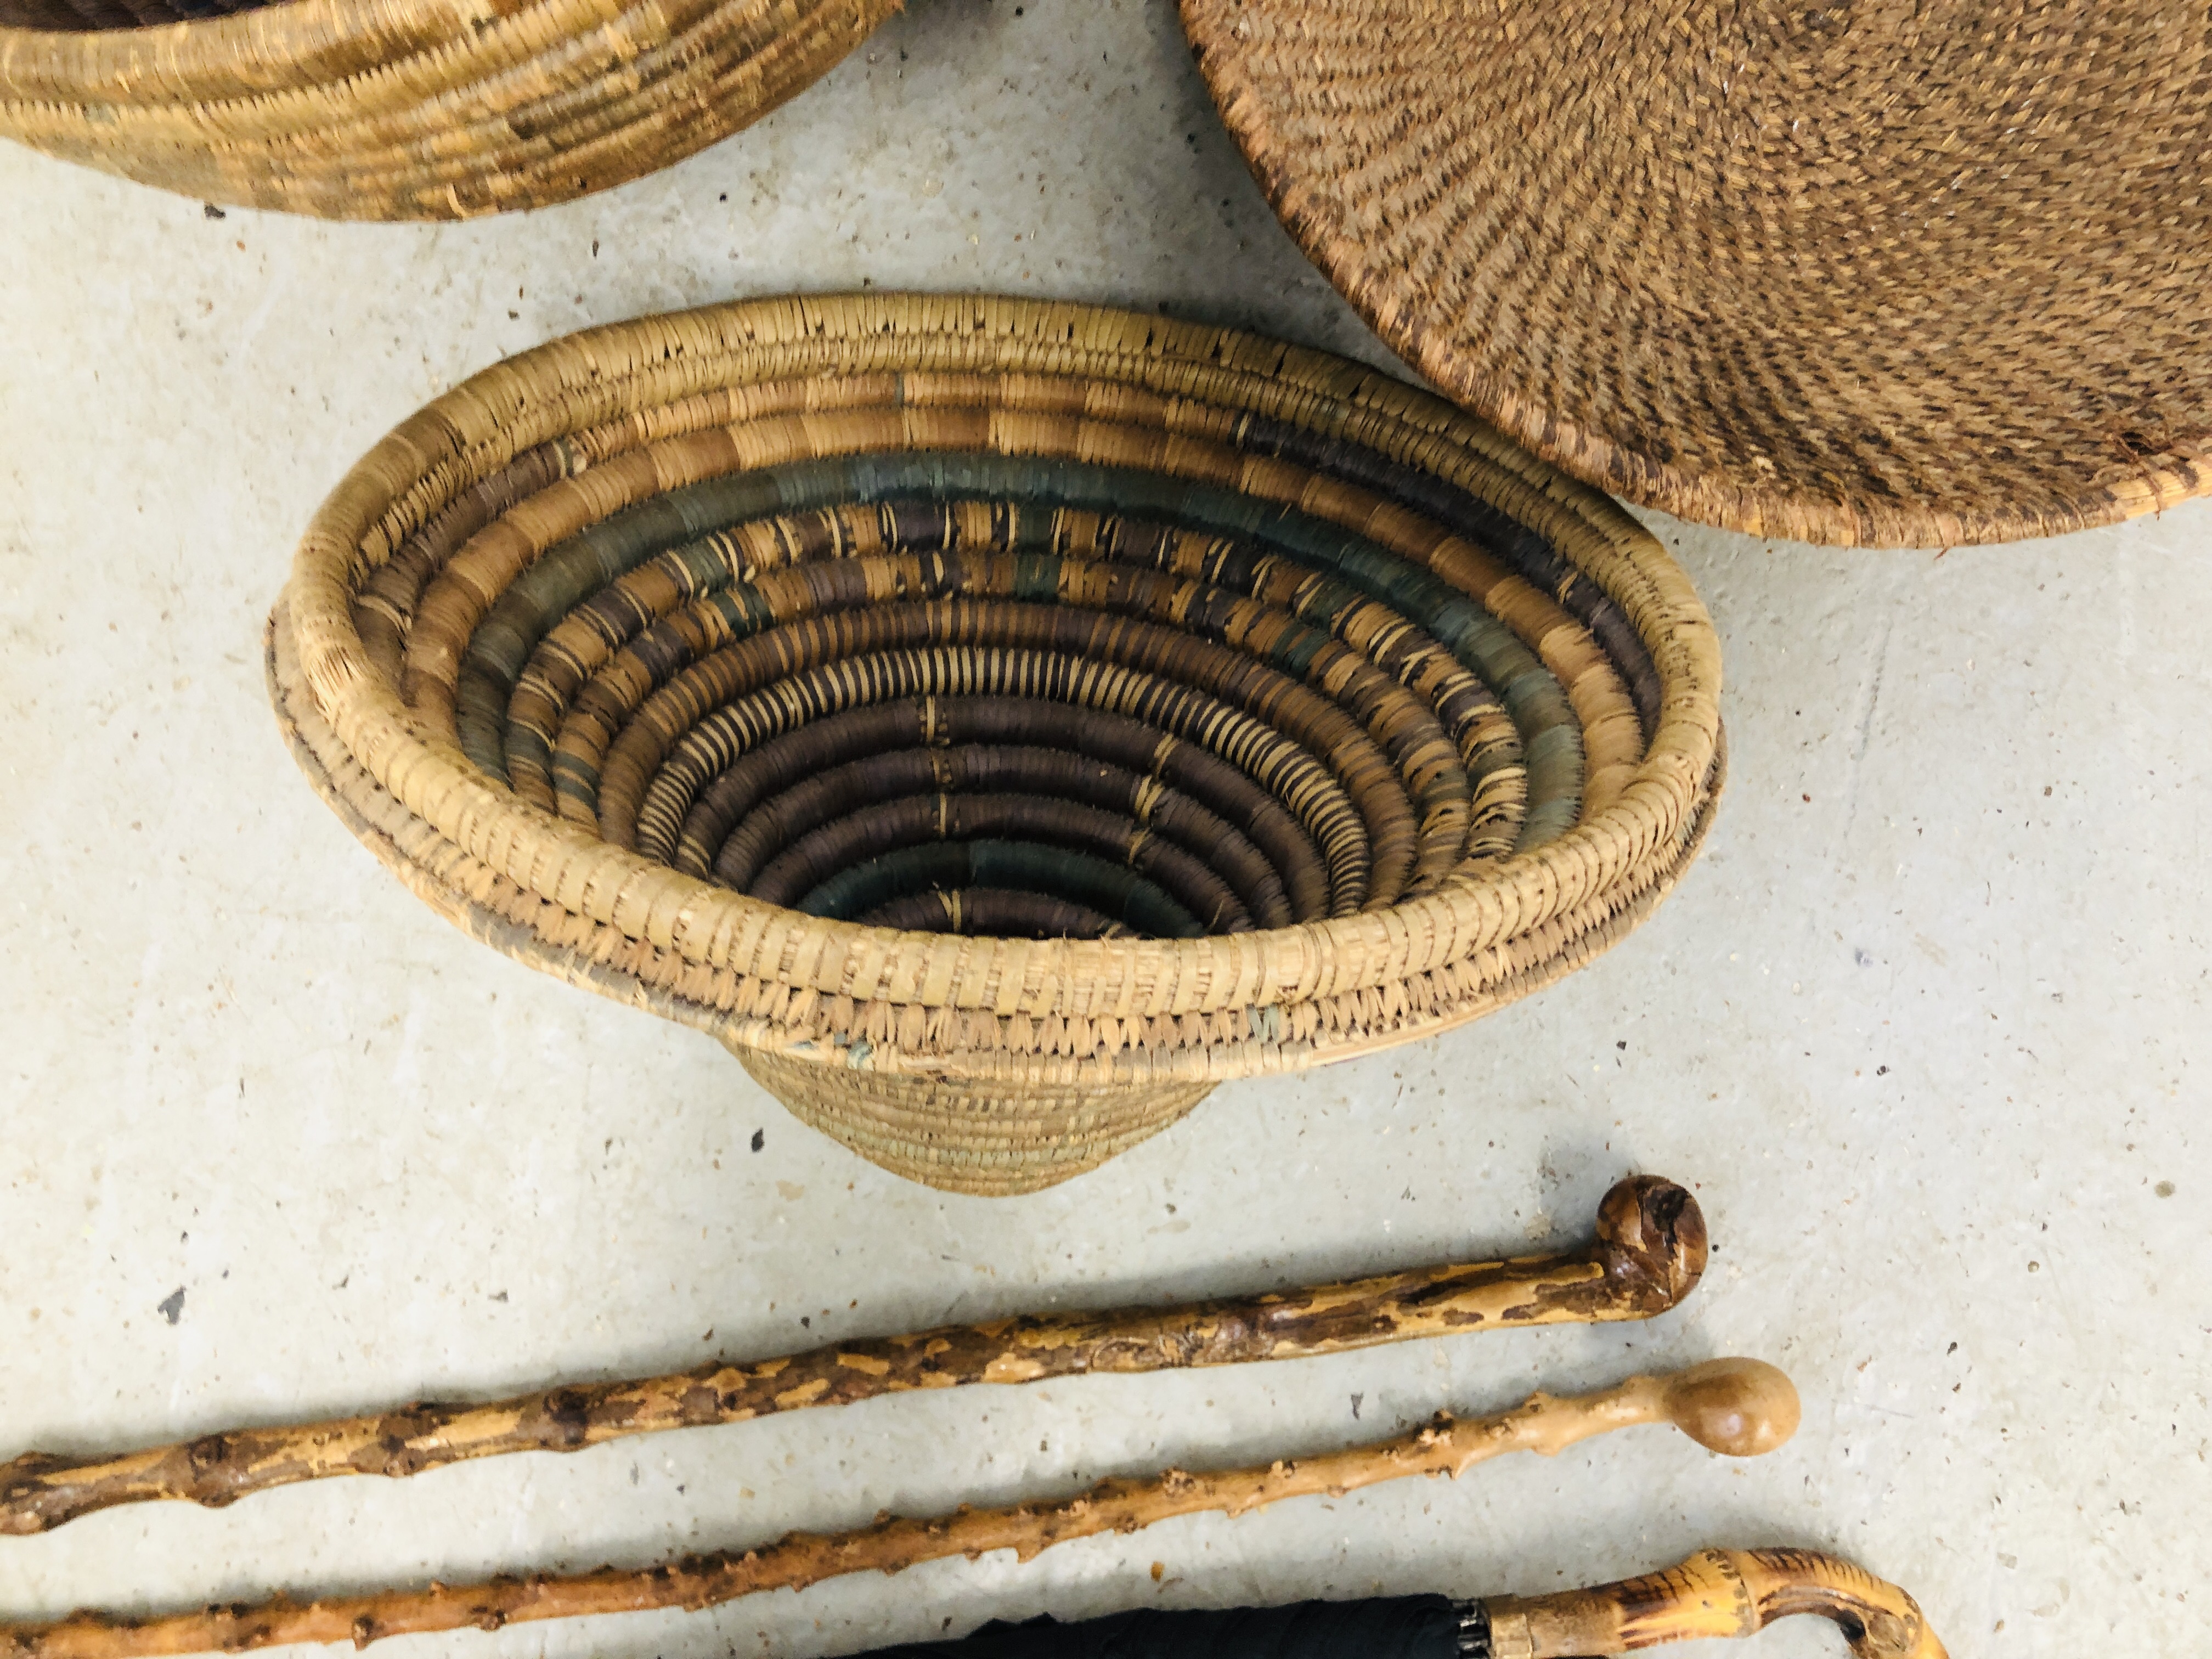 VINTAGE WICKER / SEAGRASS SNAKES BASKET AND ONE OTHER ALONG WITH 4 VINTAGE WALKING CANES, - Image 8 of 8